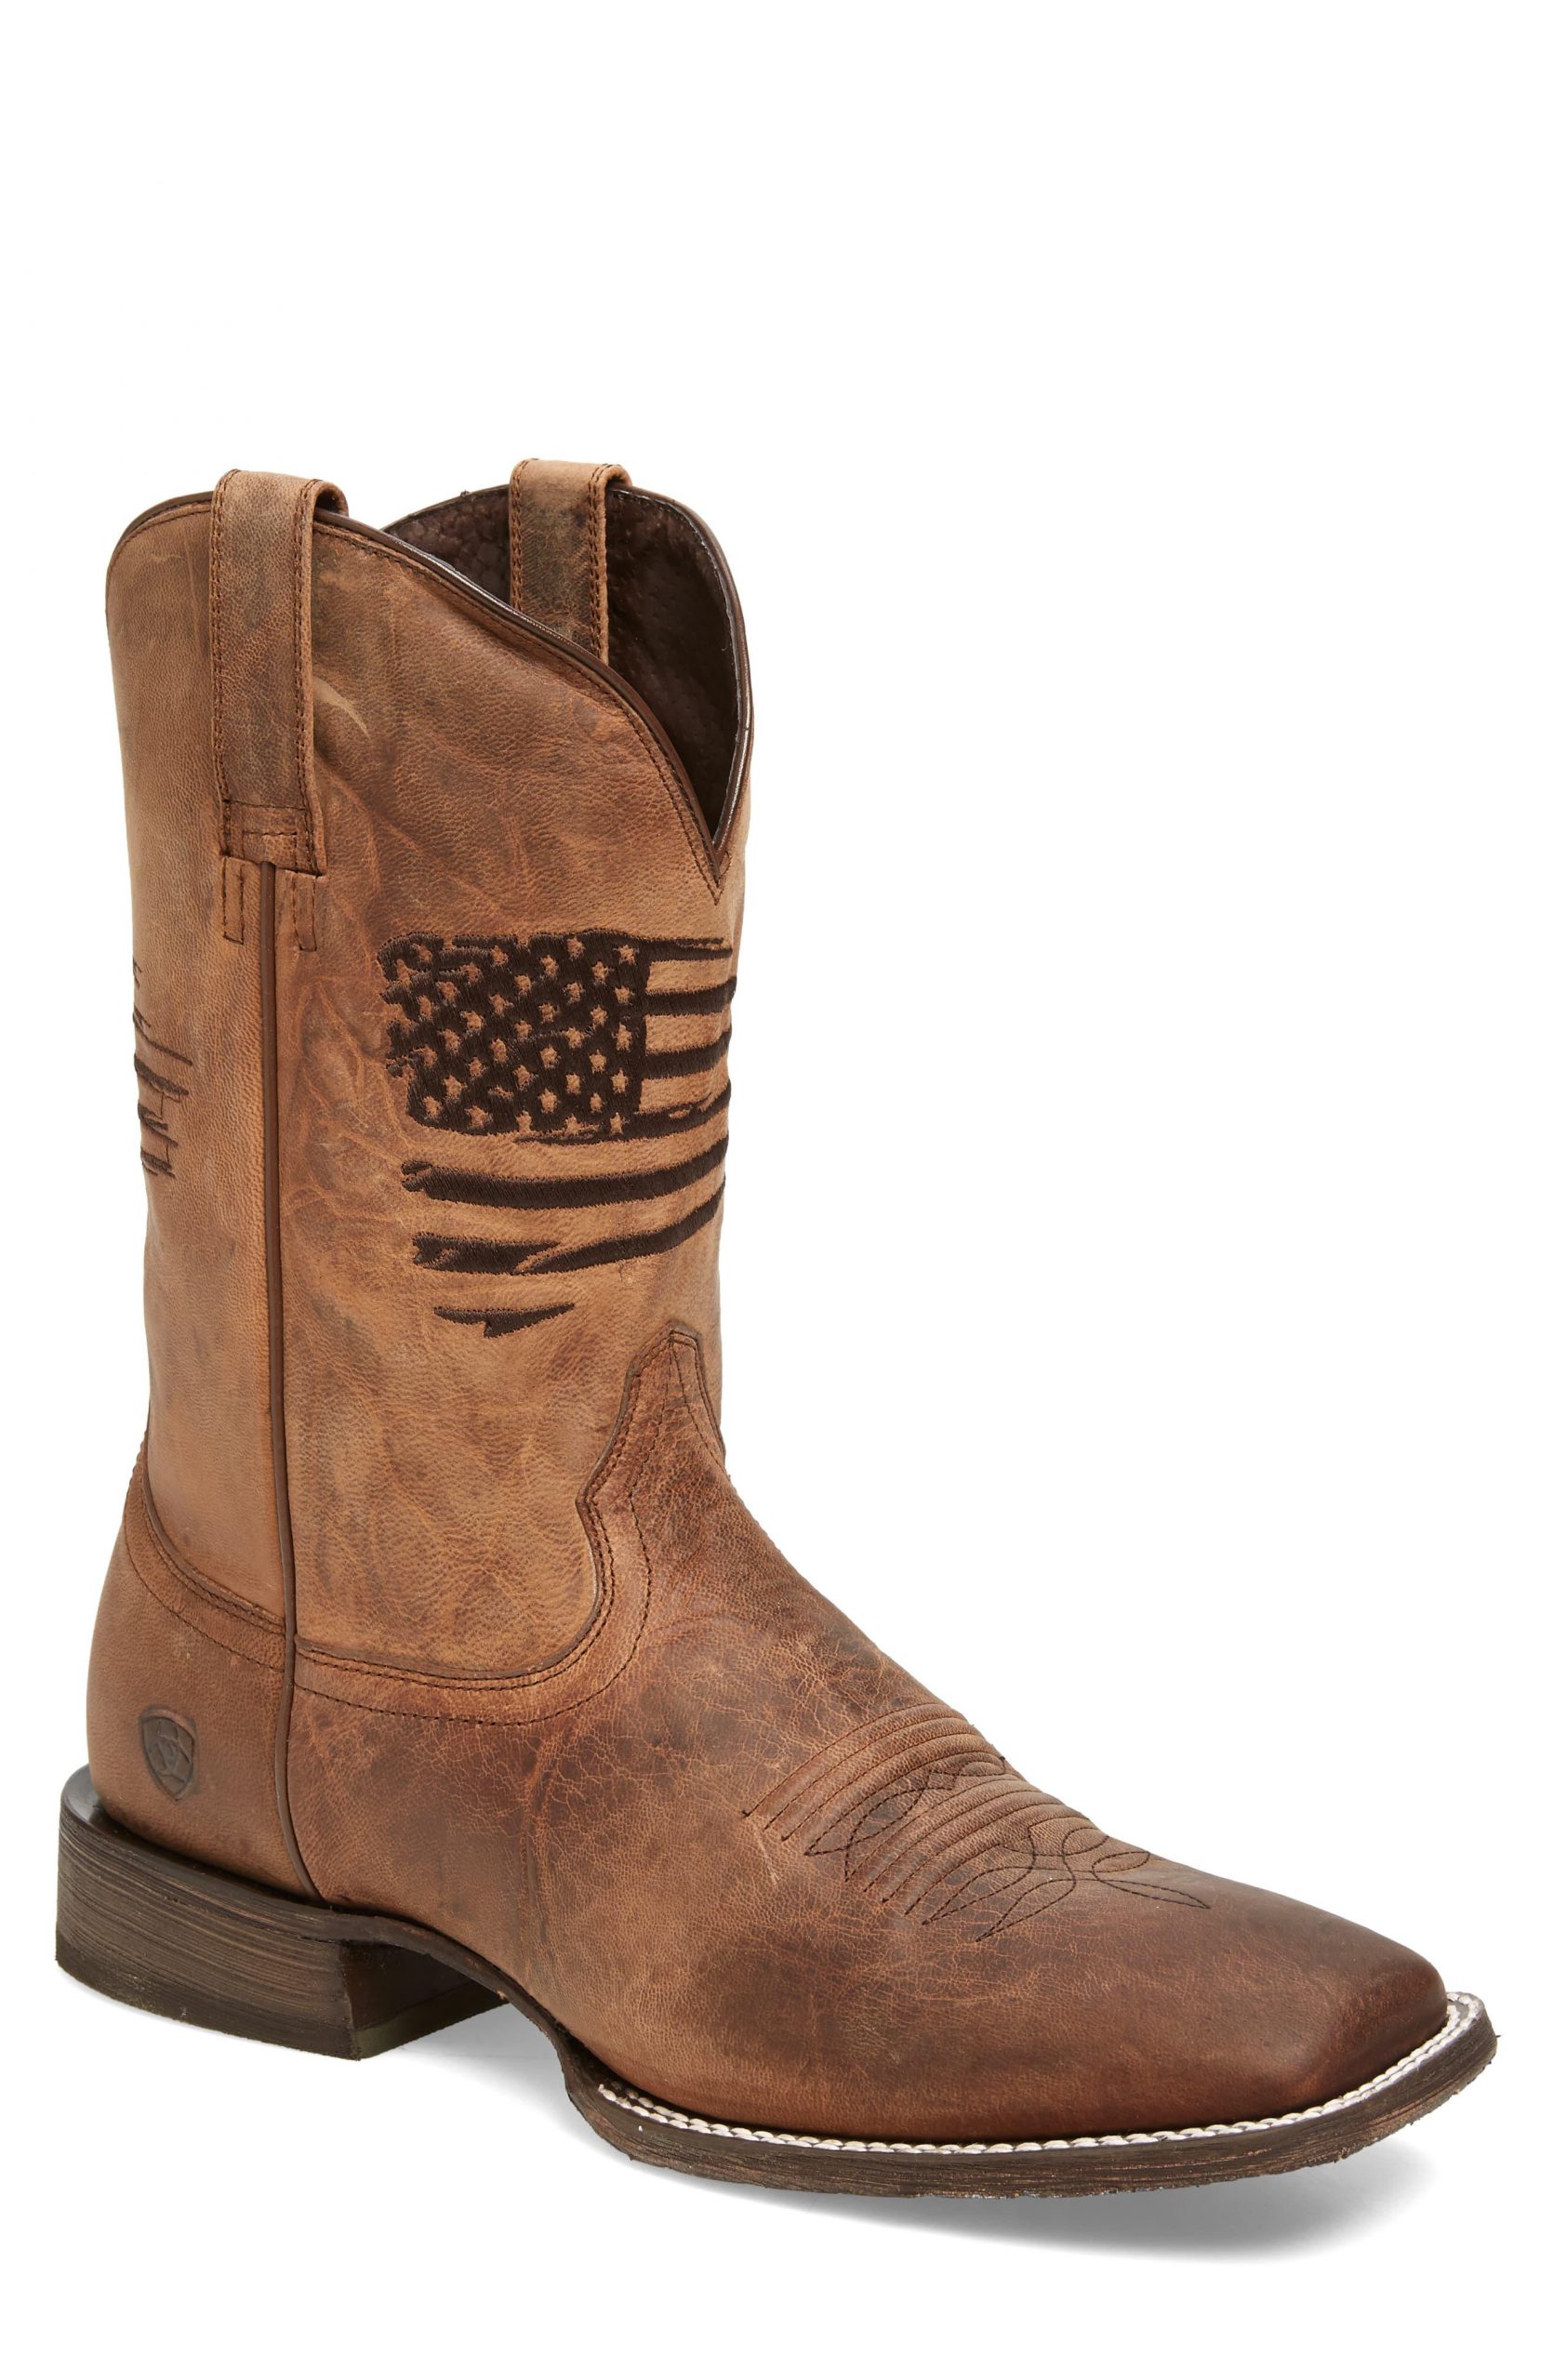 Ariat Leather Circuit Patriot Cowboy Boot in Brown for Men